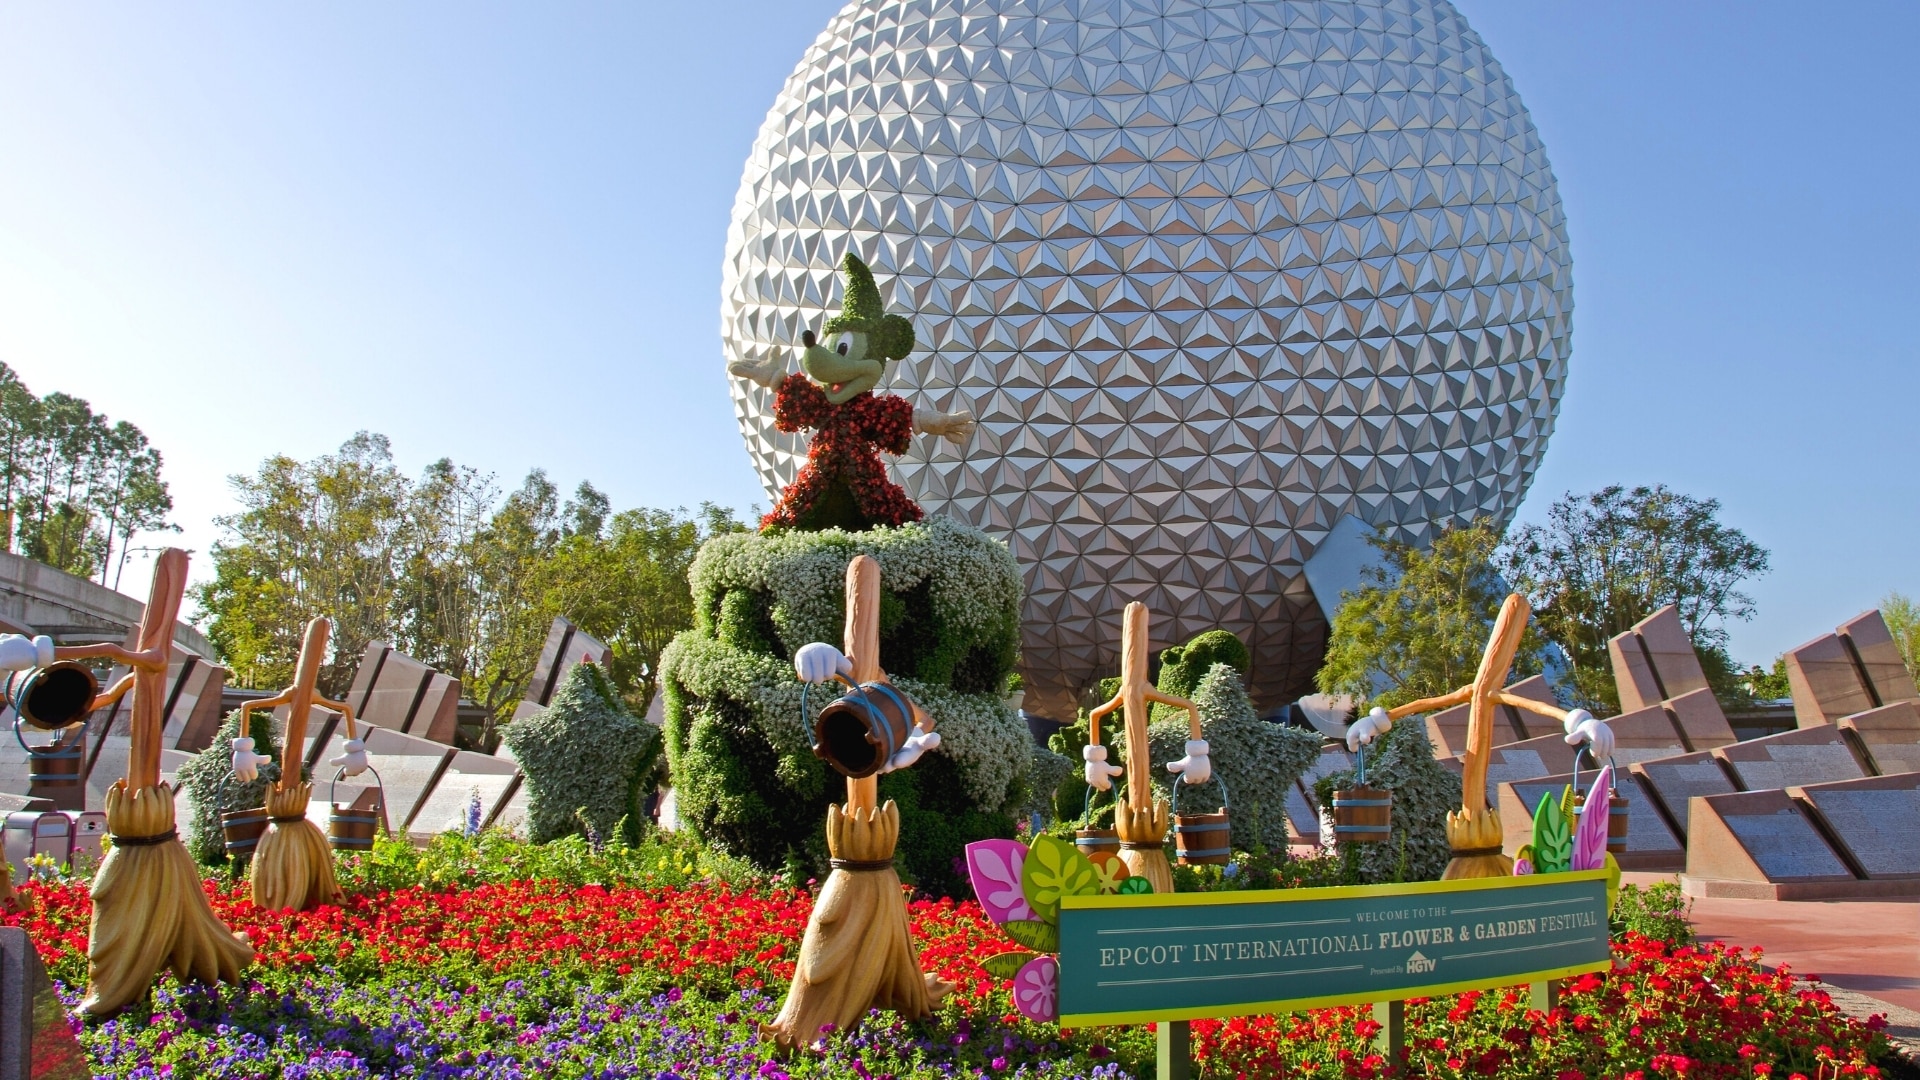 What to Do at Epcot - International Flower and Garden Festival